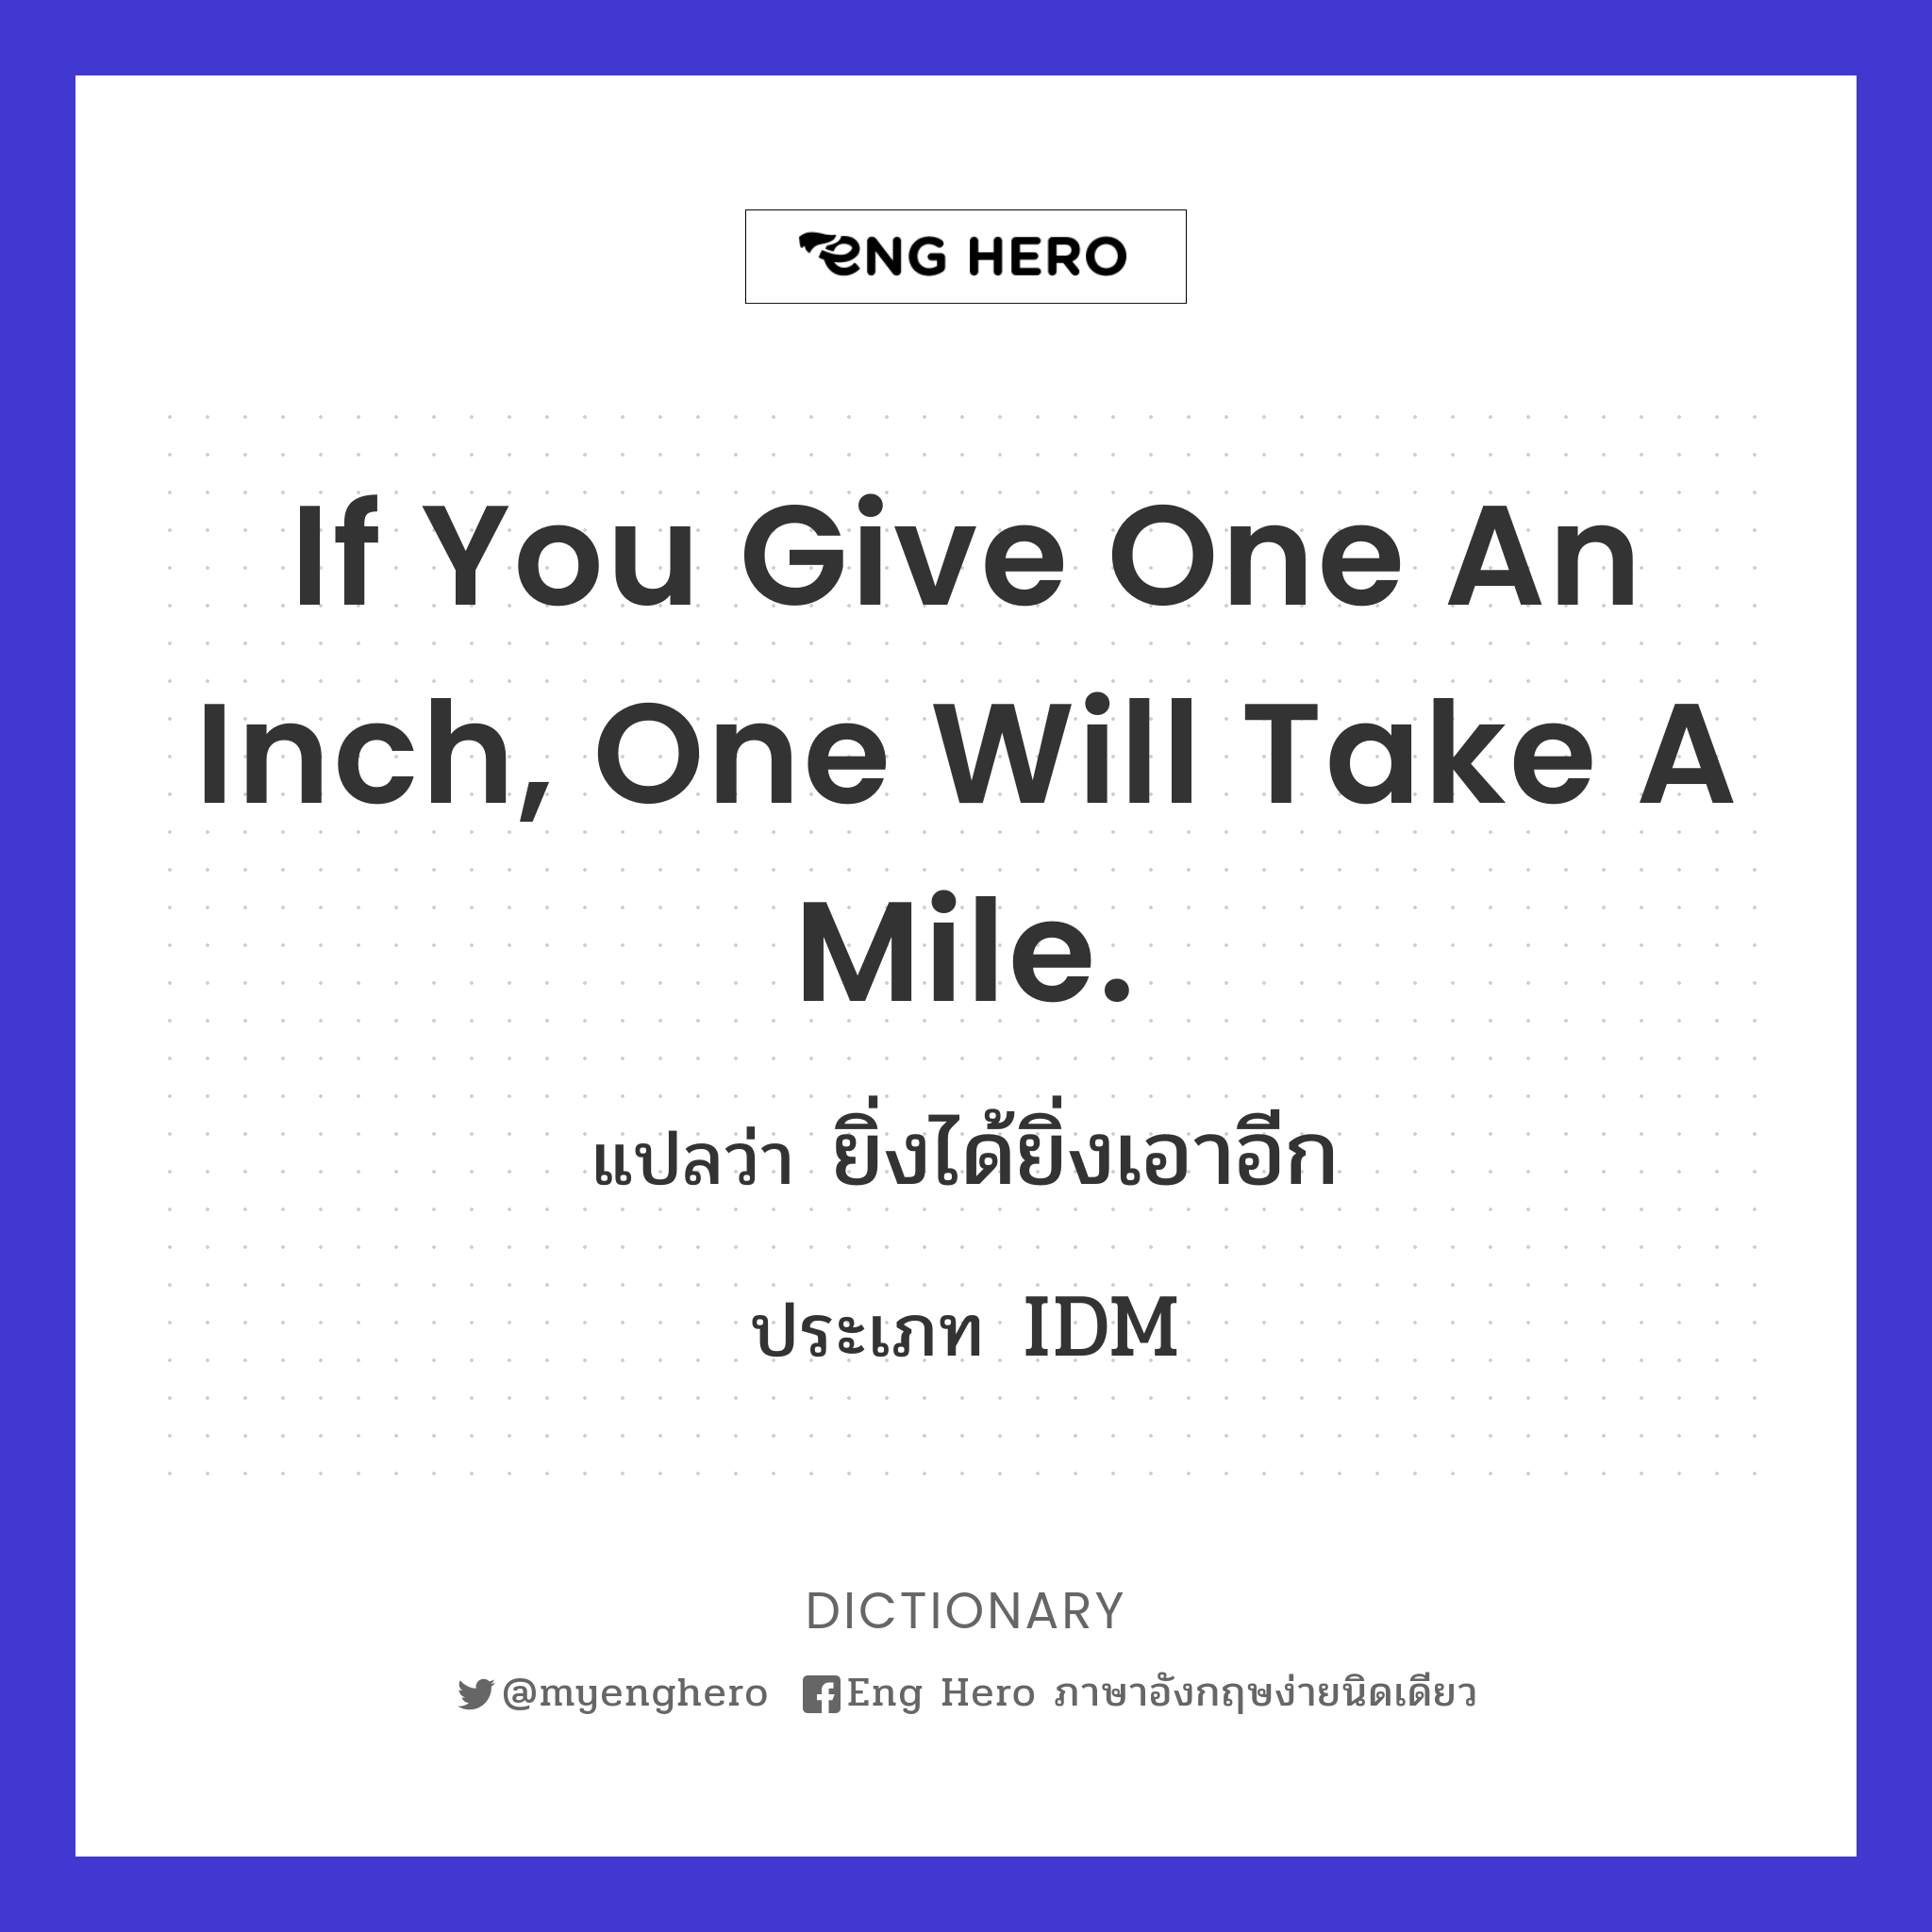 If you give one an inch, one will take a mile.